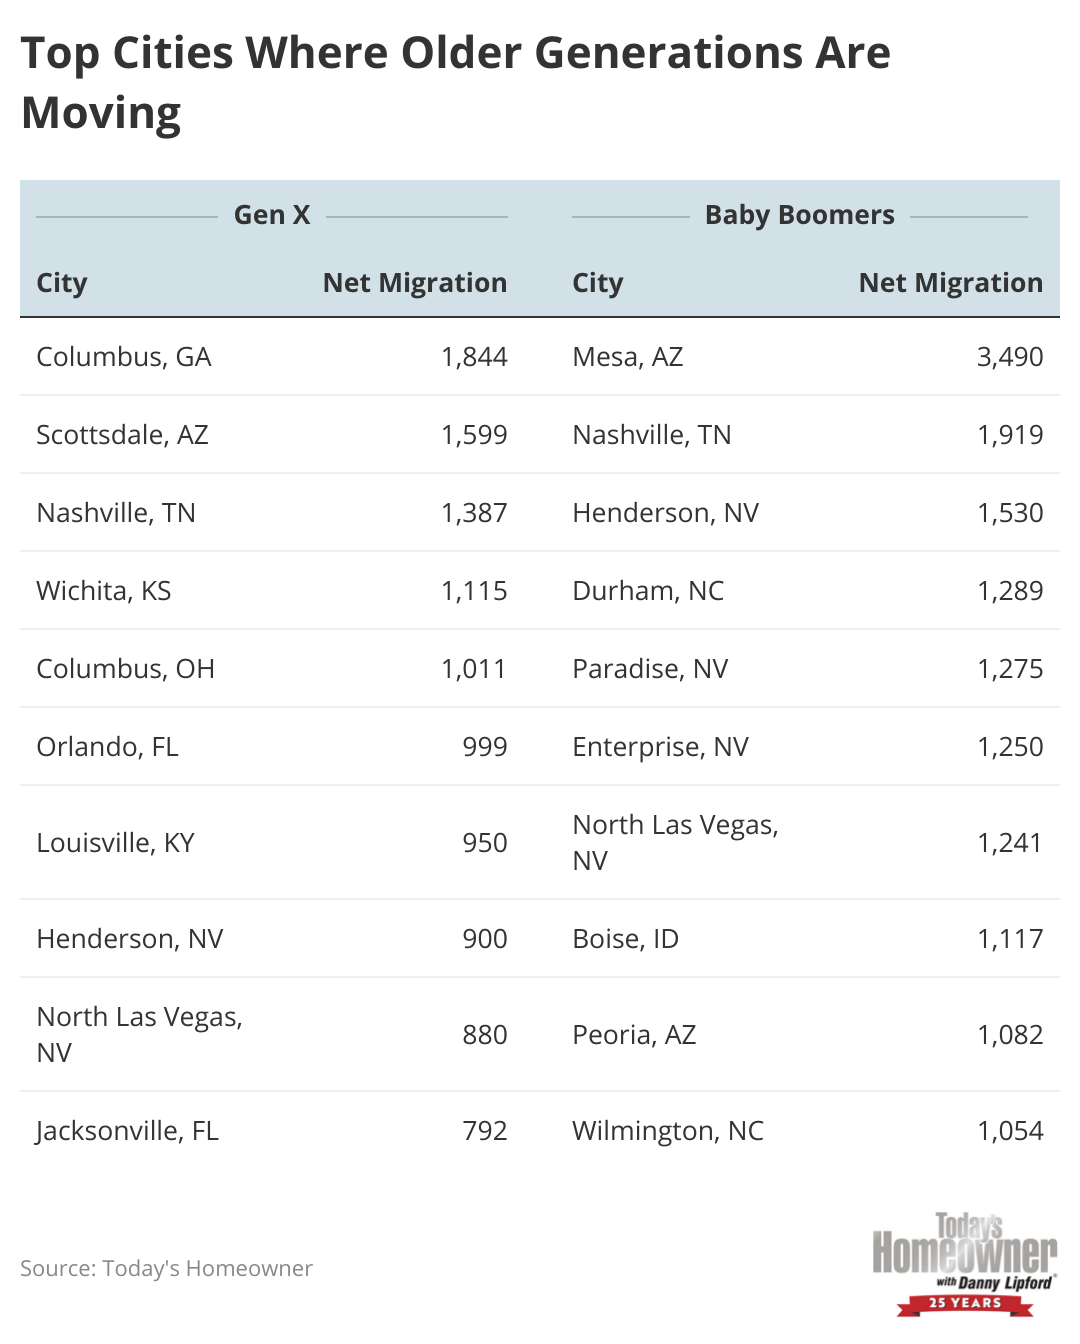 Chart showing the top cities where older generations are moving.